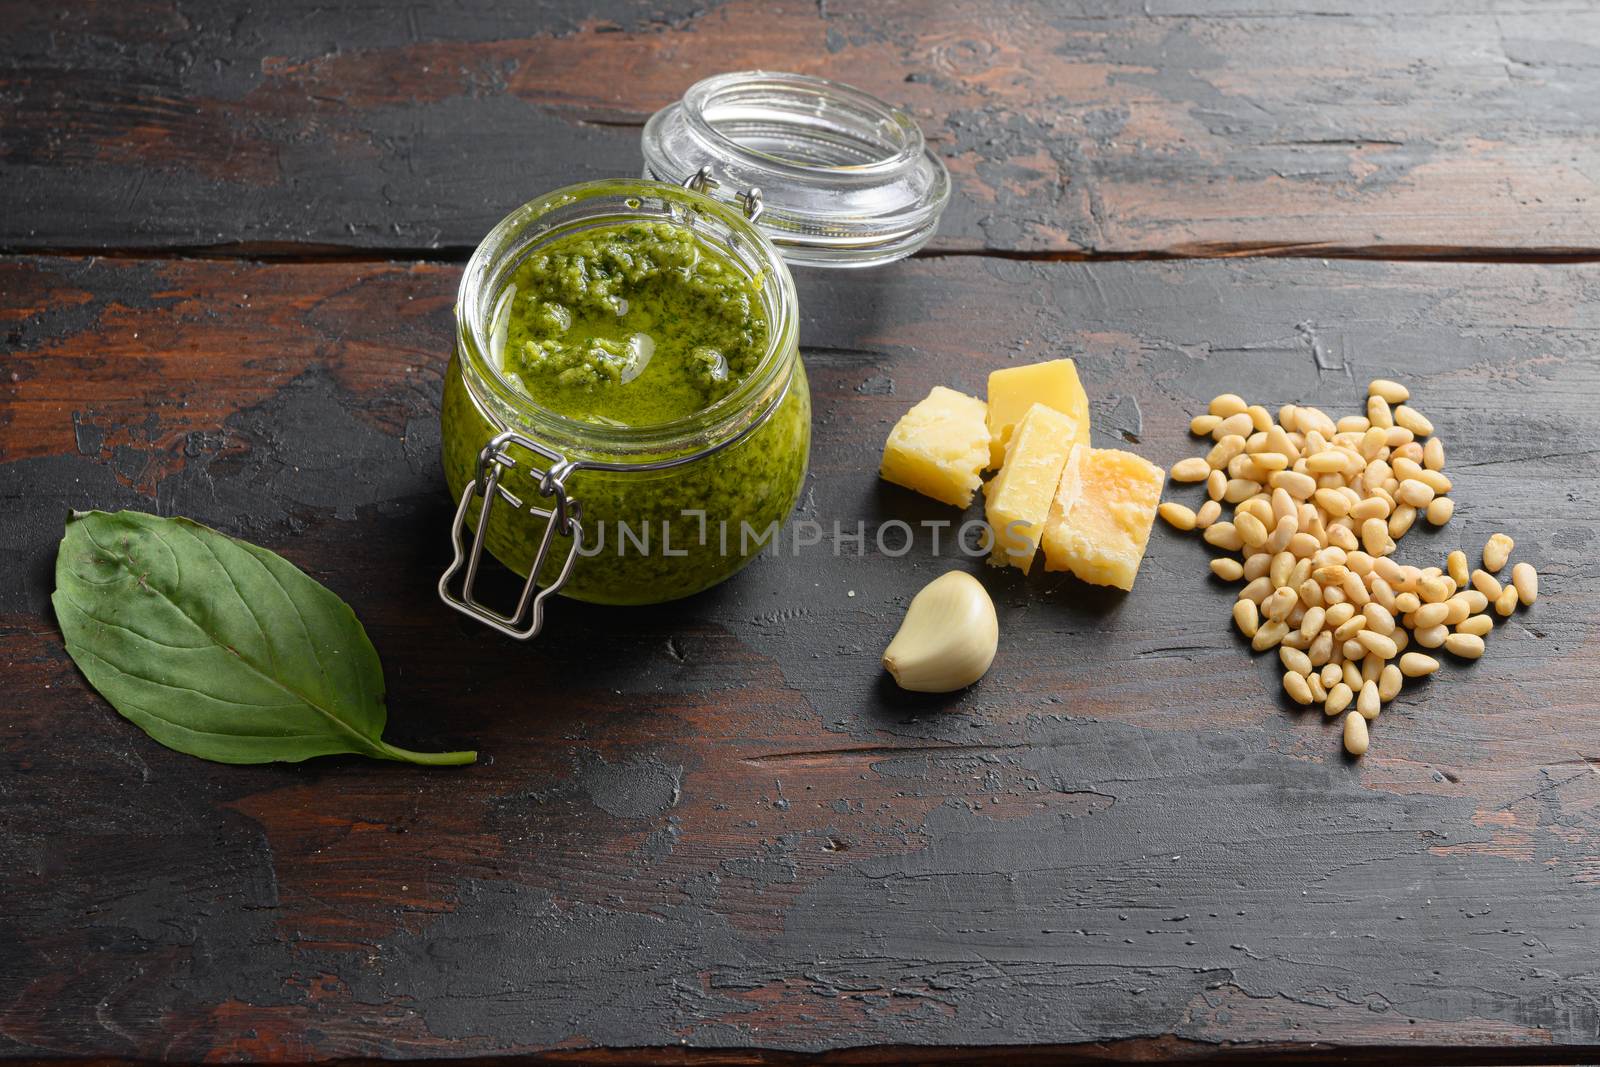 home made Pesto alla Genovese in glass jar with ingredients parmesan basil pine nuts. on dark wood table planks vintage side view by Ilianesolenyi